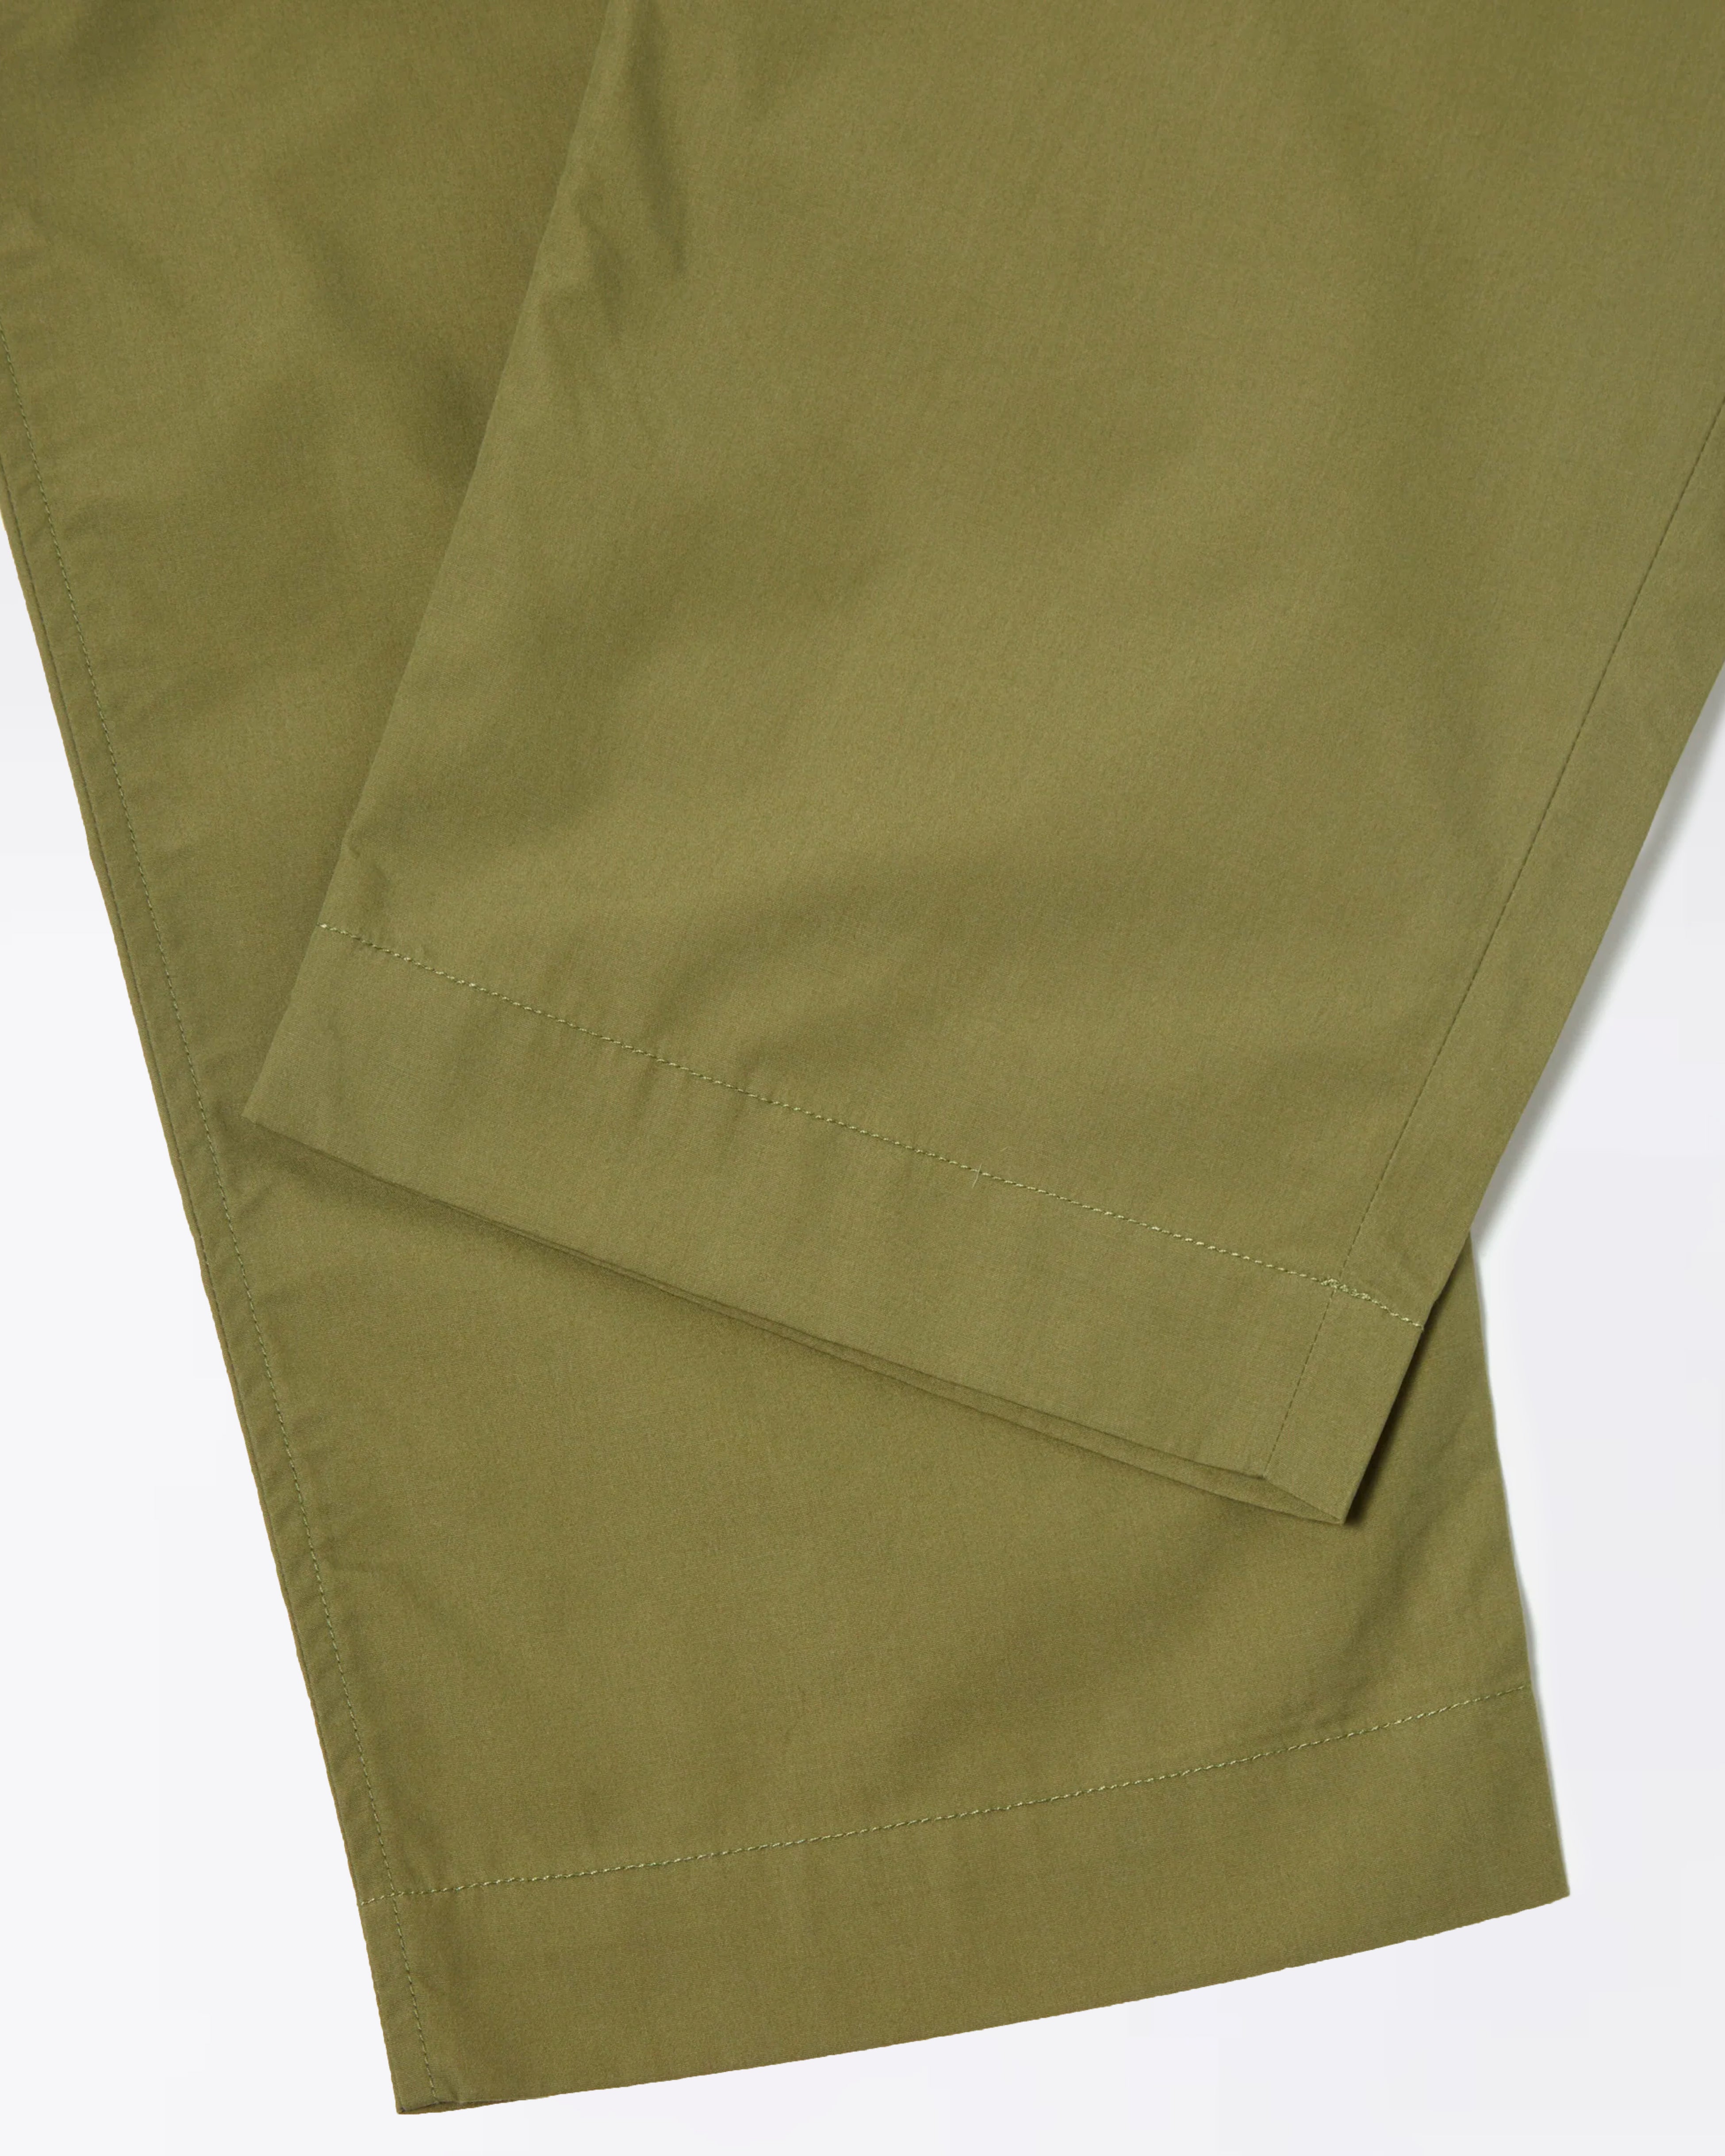 OXFORD PANT OLIVE